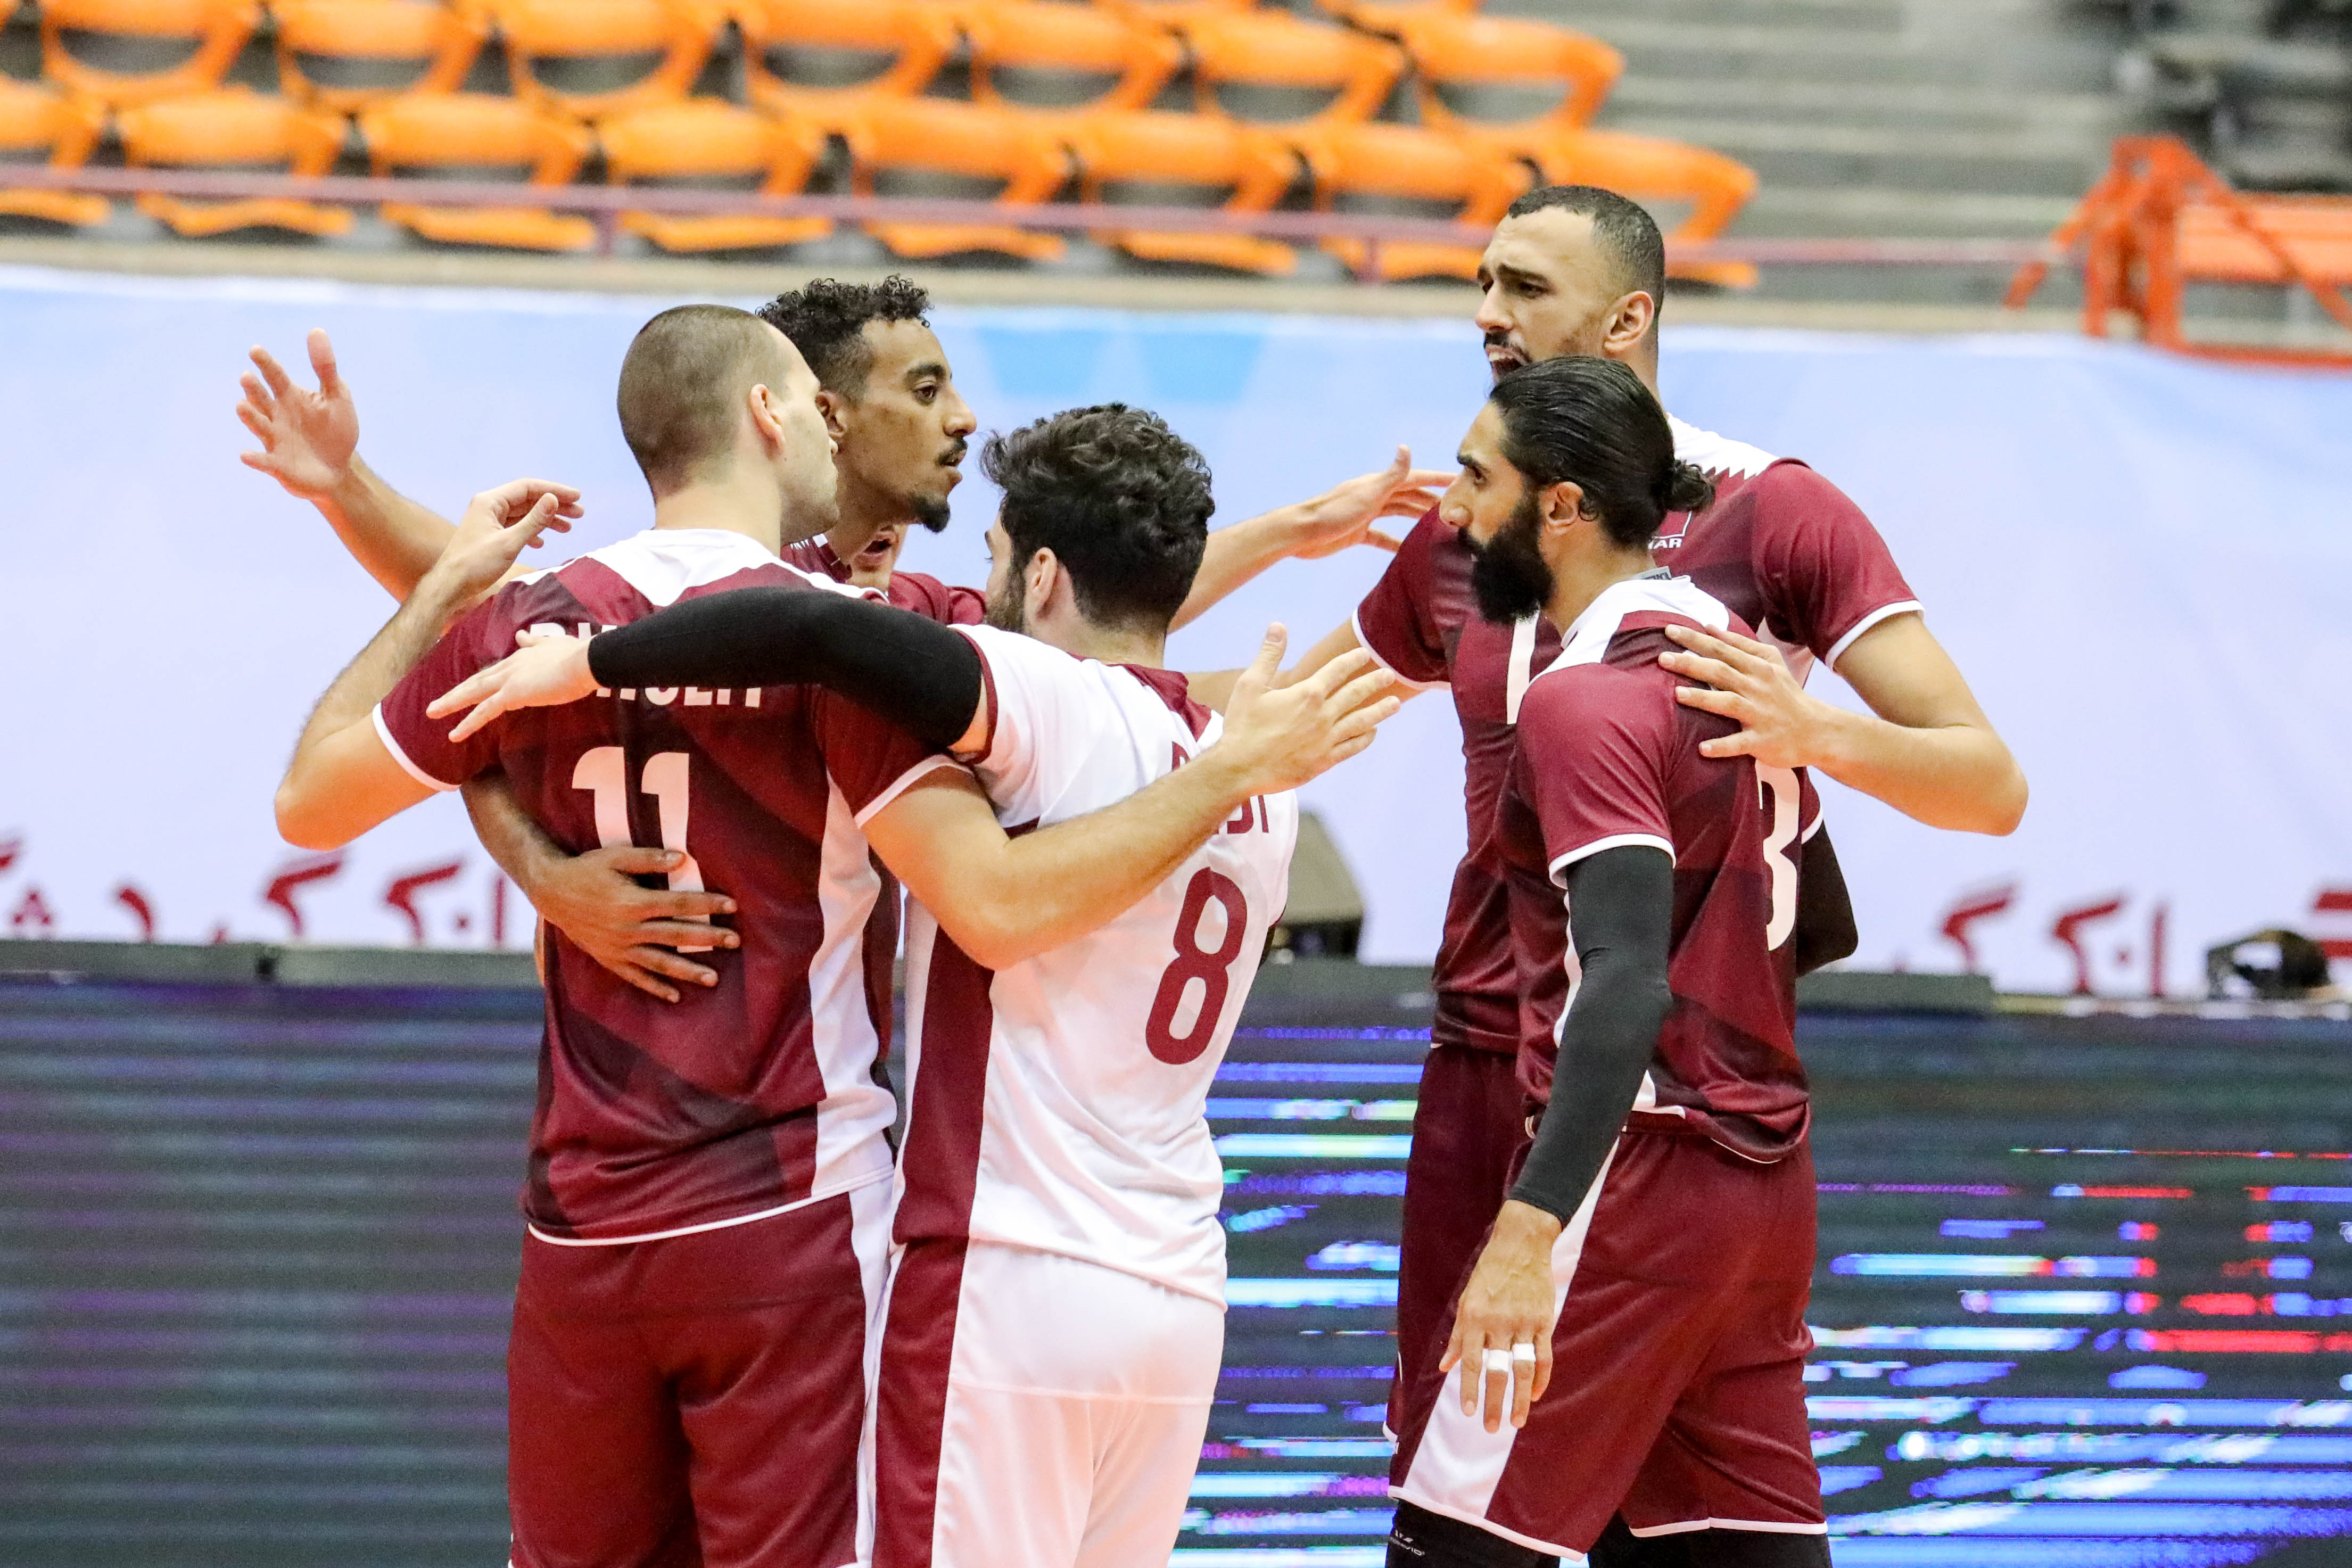 QATAR SEAL FIRST WIN AFTER 3-0 ROUT OF SRI LANKA